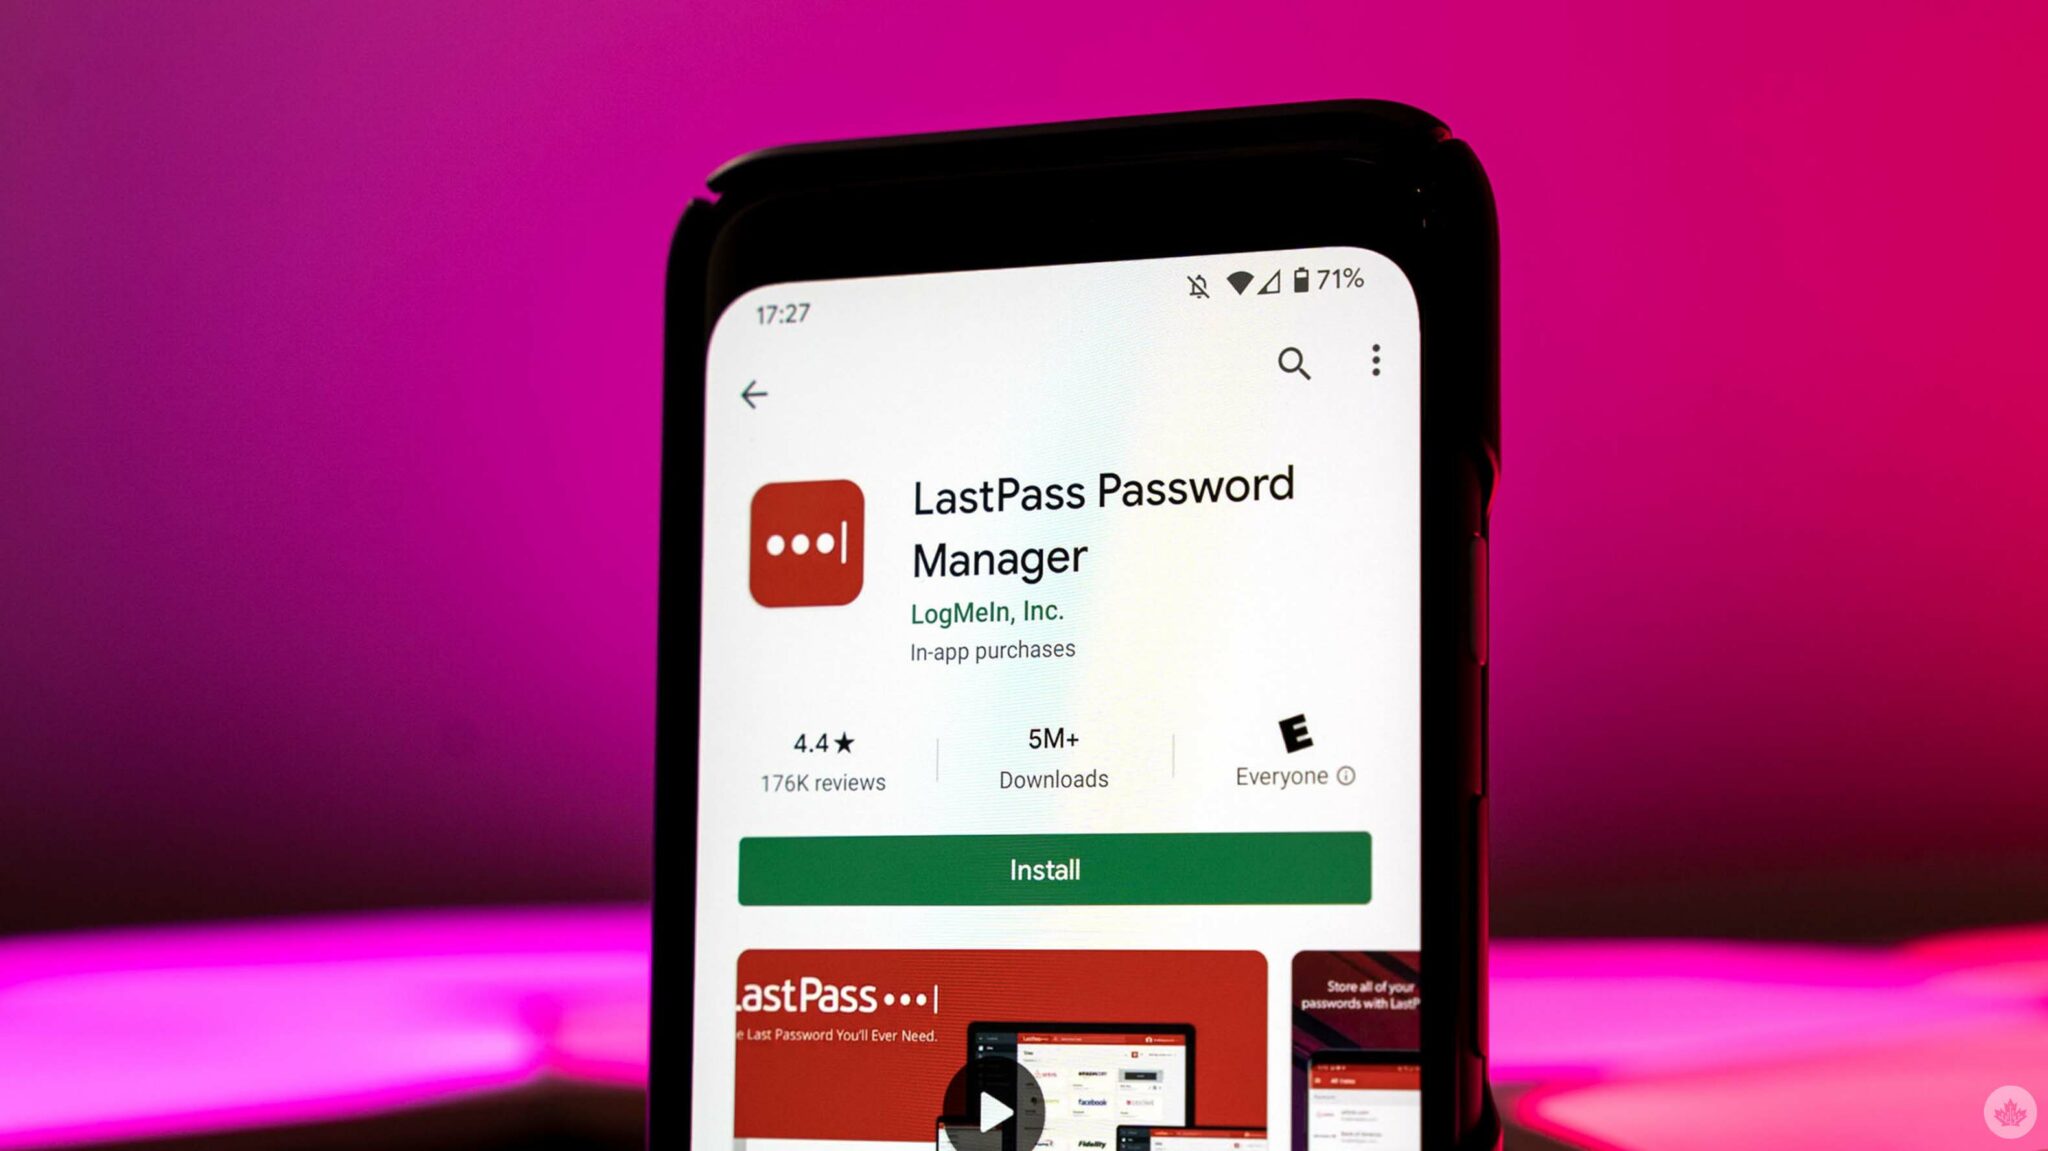 Several LastPass users reported login attempts using their correct passwords